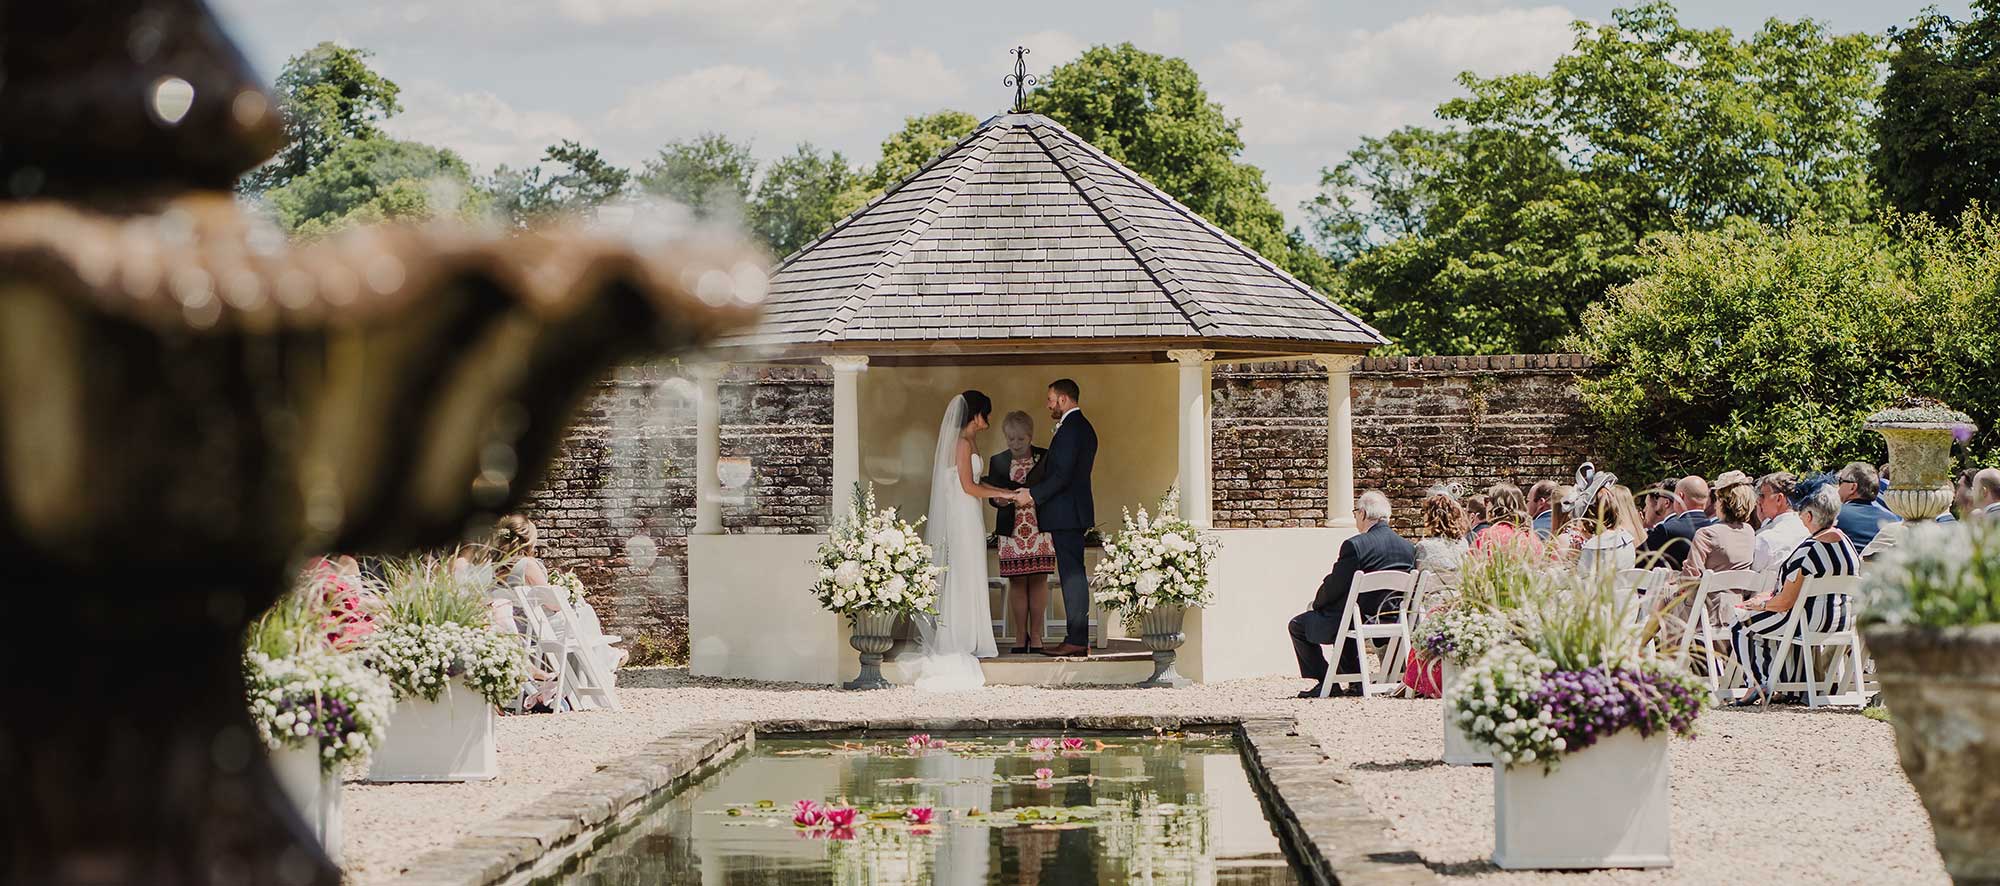 Kingston Bagpuize House | Wedding Venue in Oxfordshire | For Better For